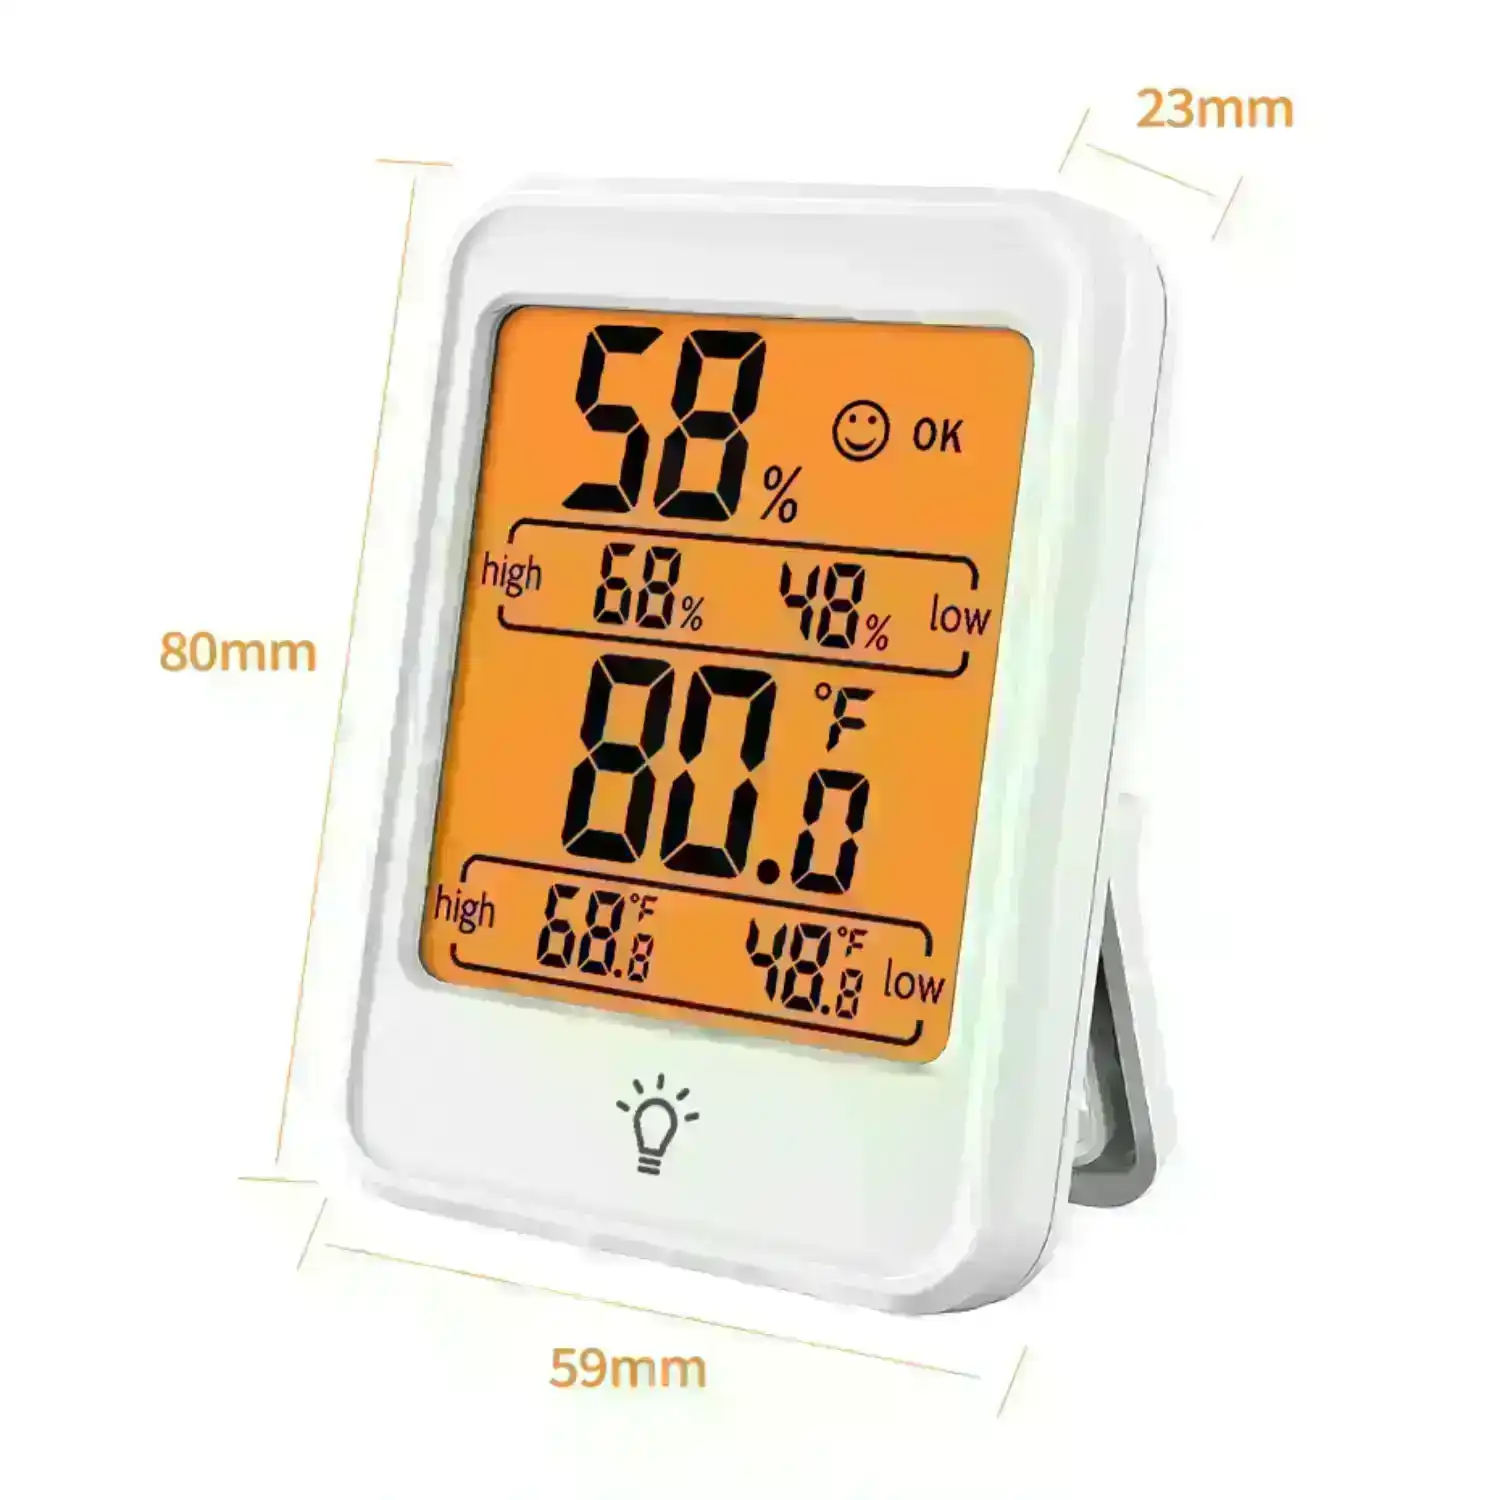 Gominimo 10 Seconds Refresh Rate Thermo Hygrometer No Backlight White